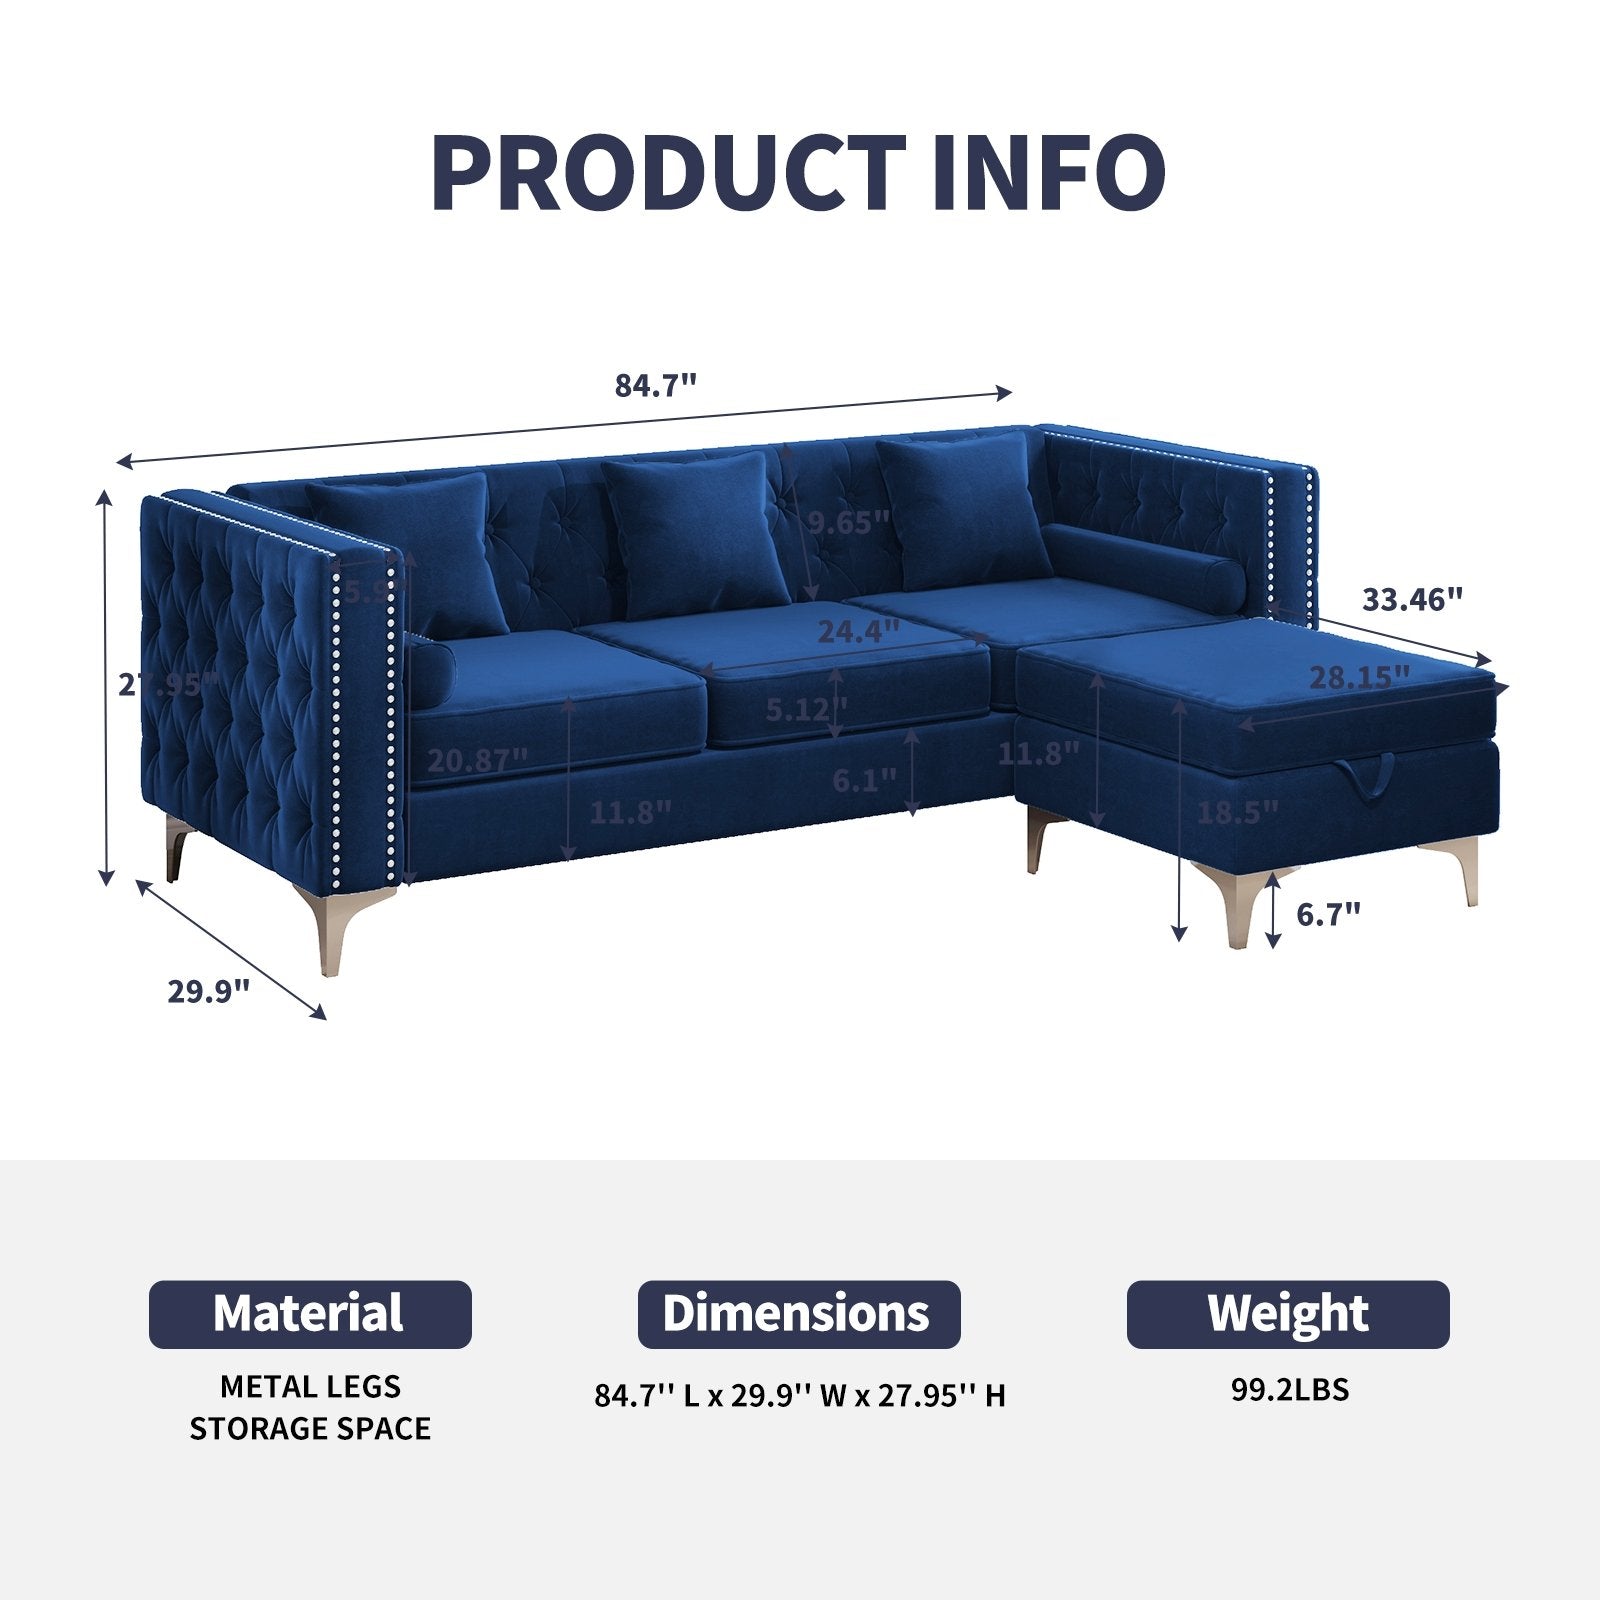 Sectional Sofa | 3-Seater Velvet Fabric Upholstered Chaise With Storage Ottoman - uenjoysofa